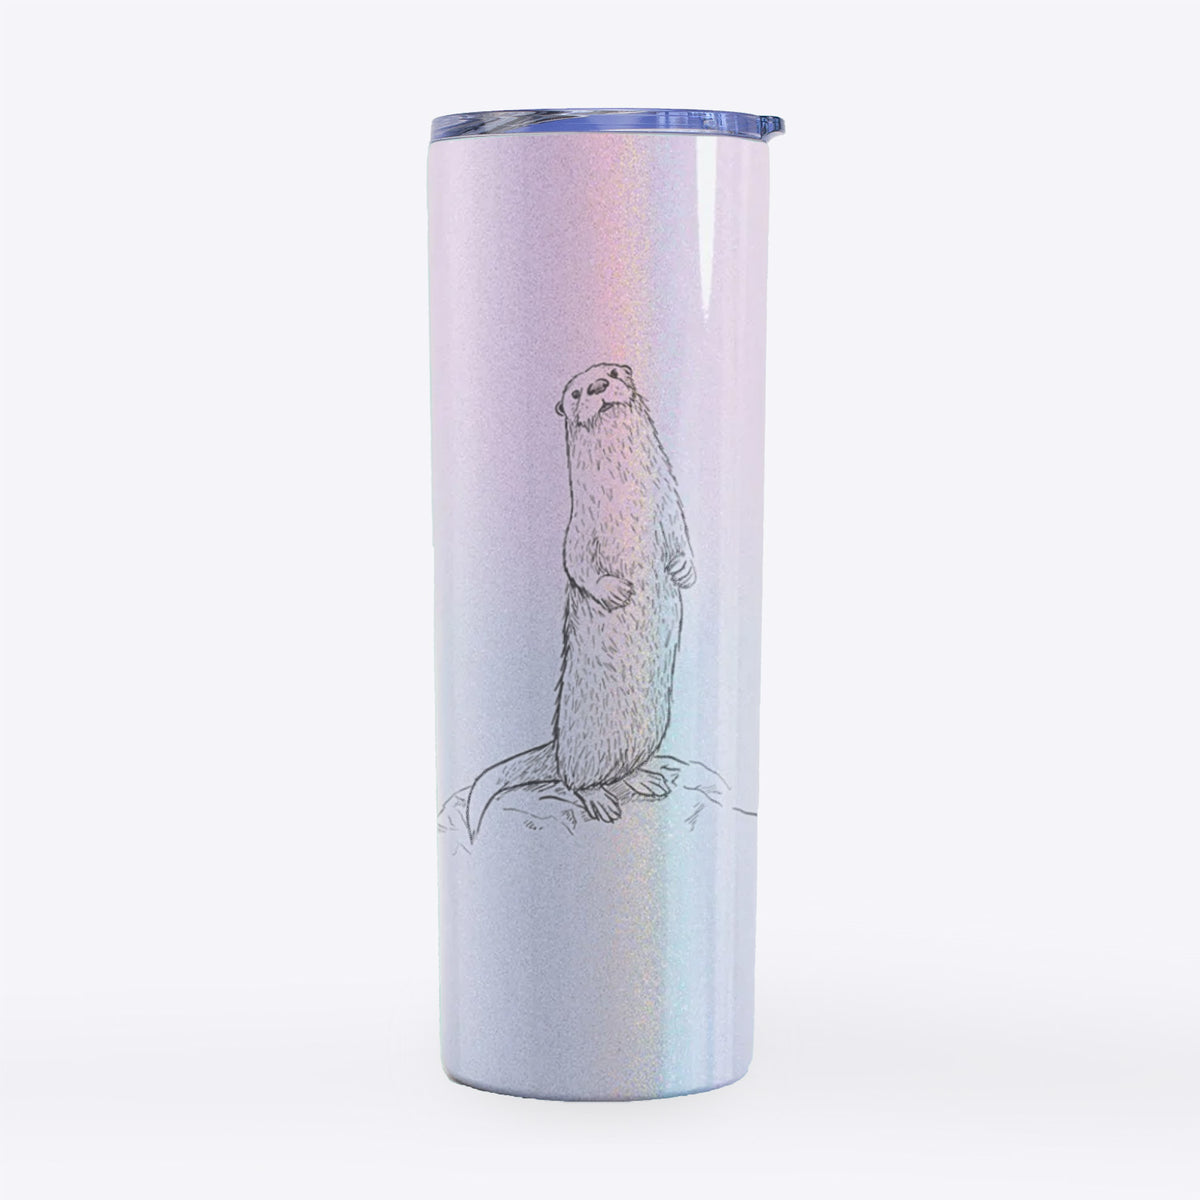 North American River Otter - Lontra canadensis - 20oz Skinny Tumbler